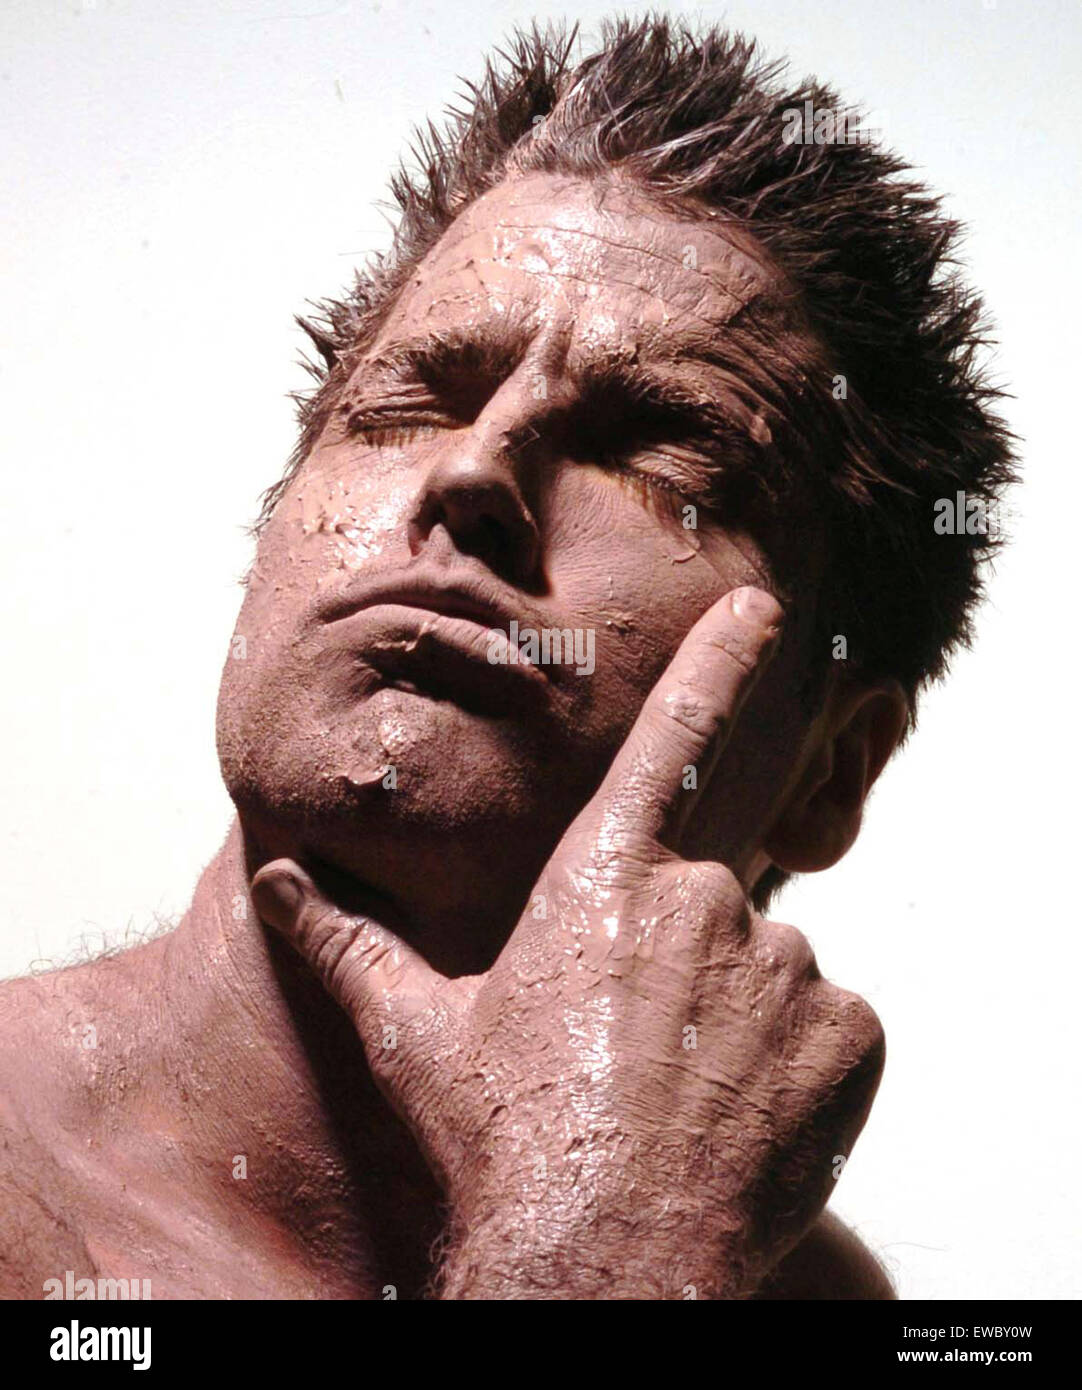 man with mud on his face thinks Stock Photo